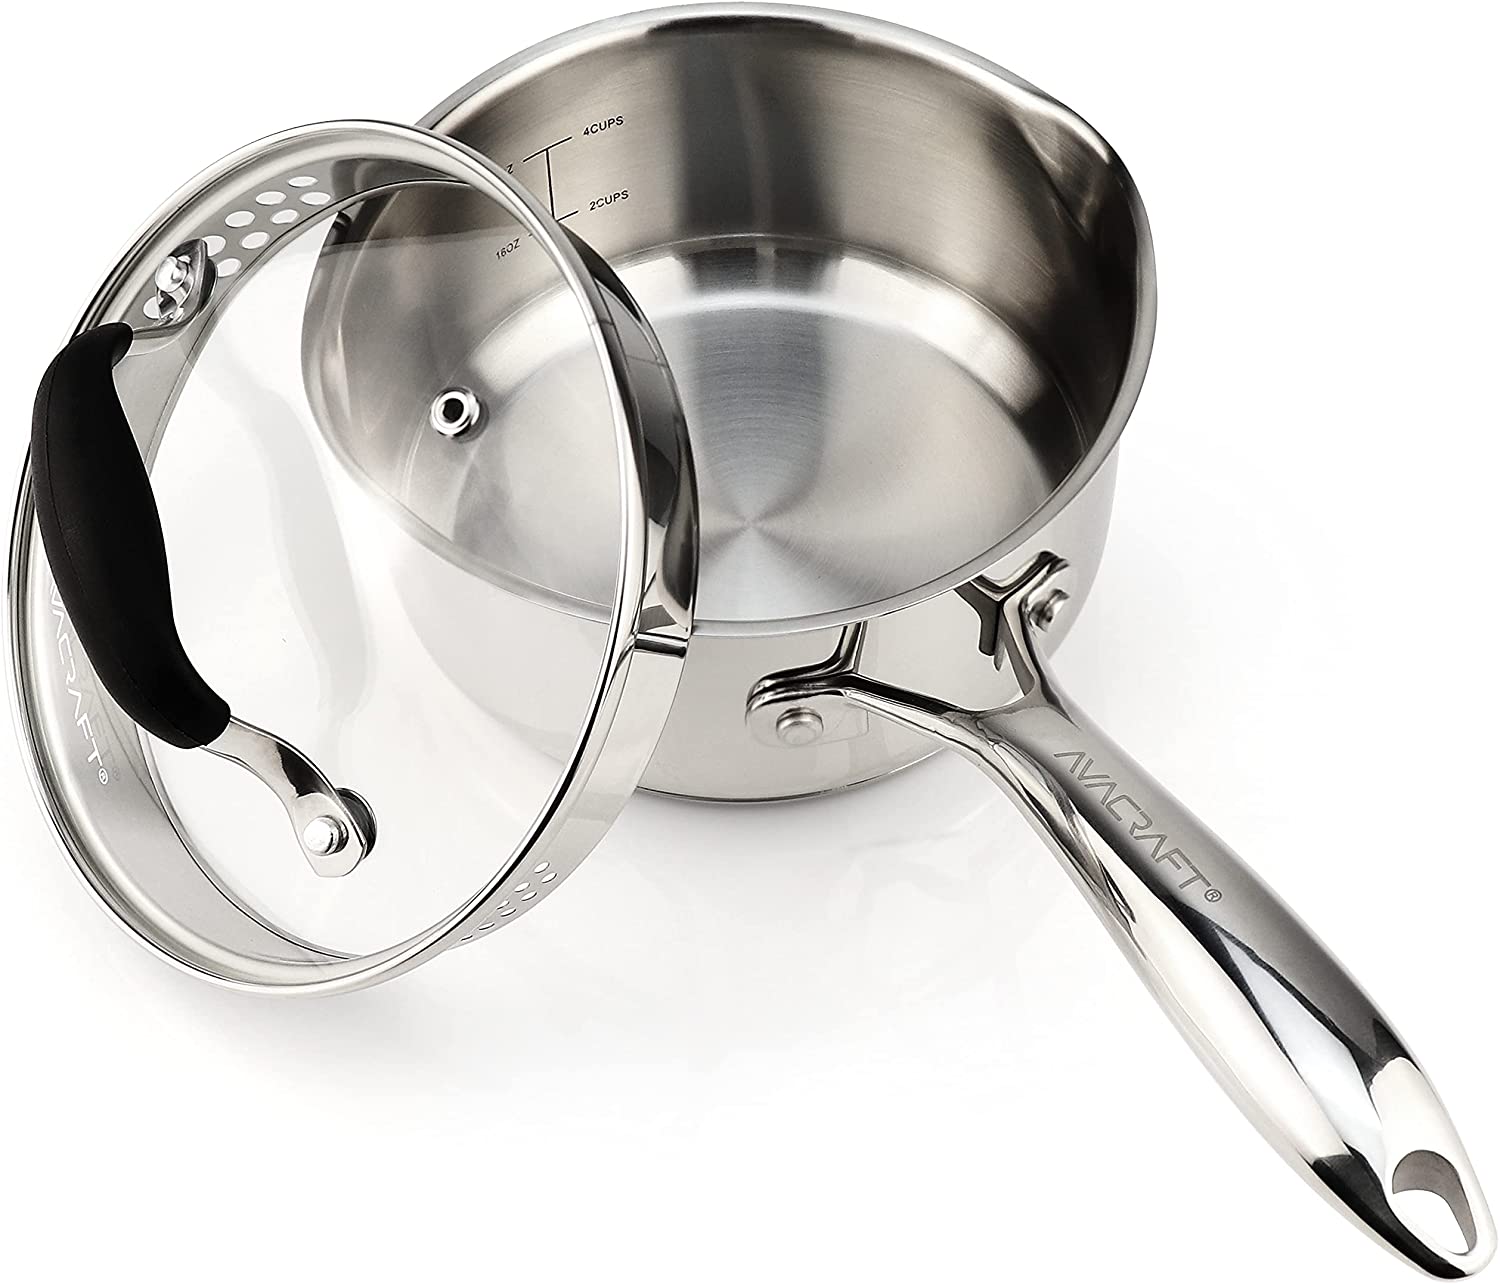 Best Value Stainless Steel Pot